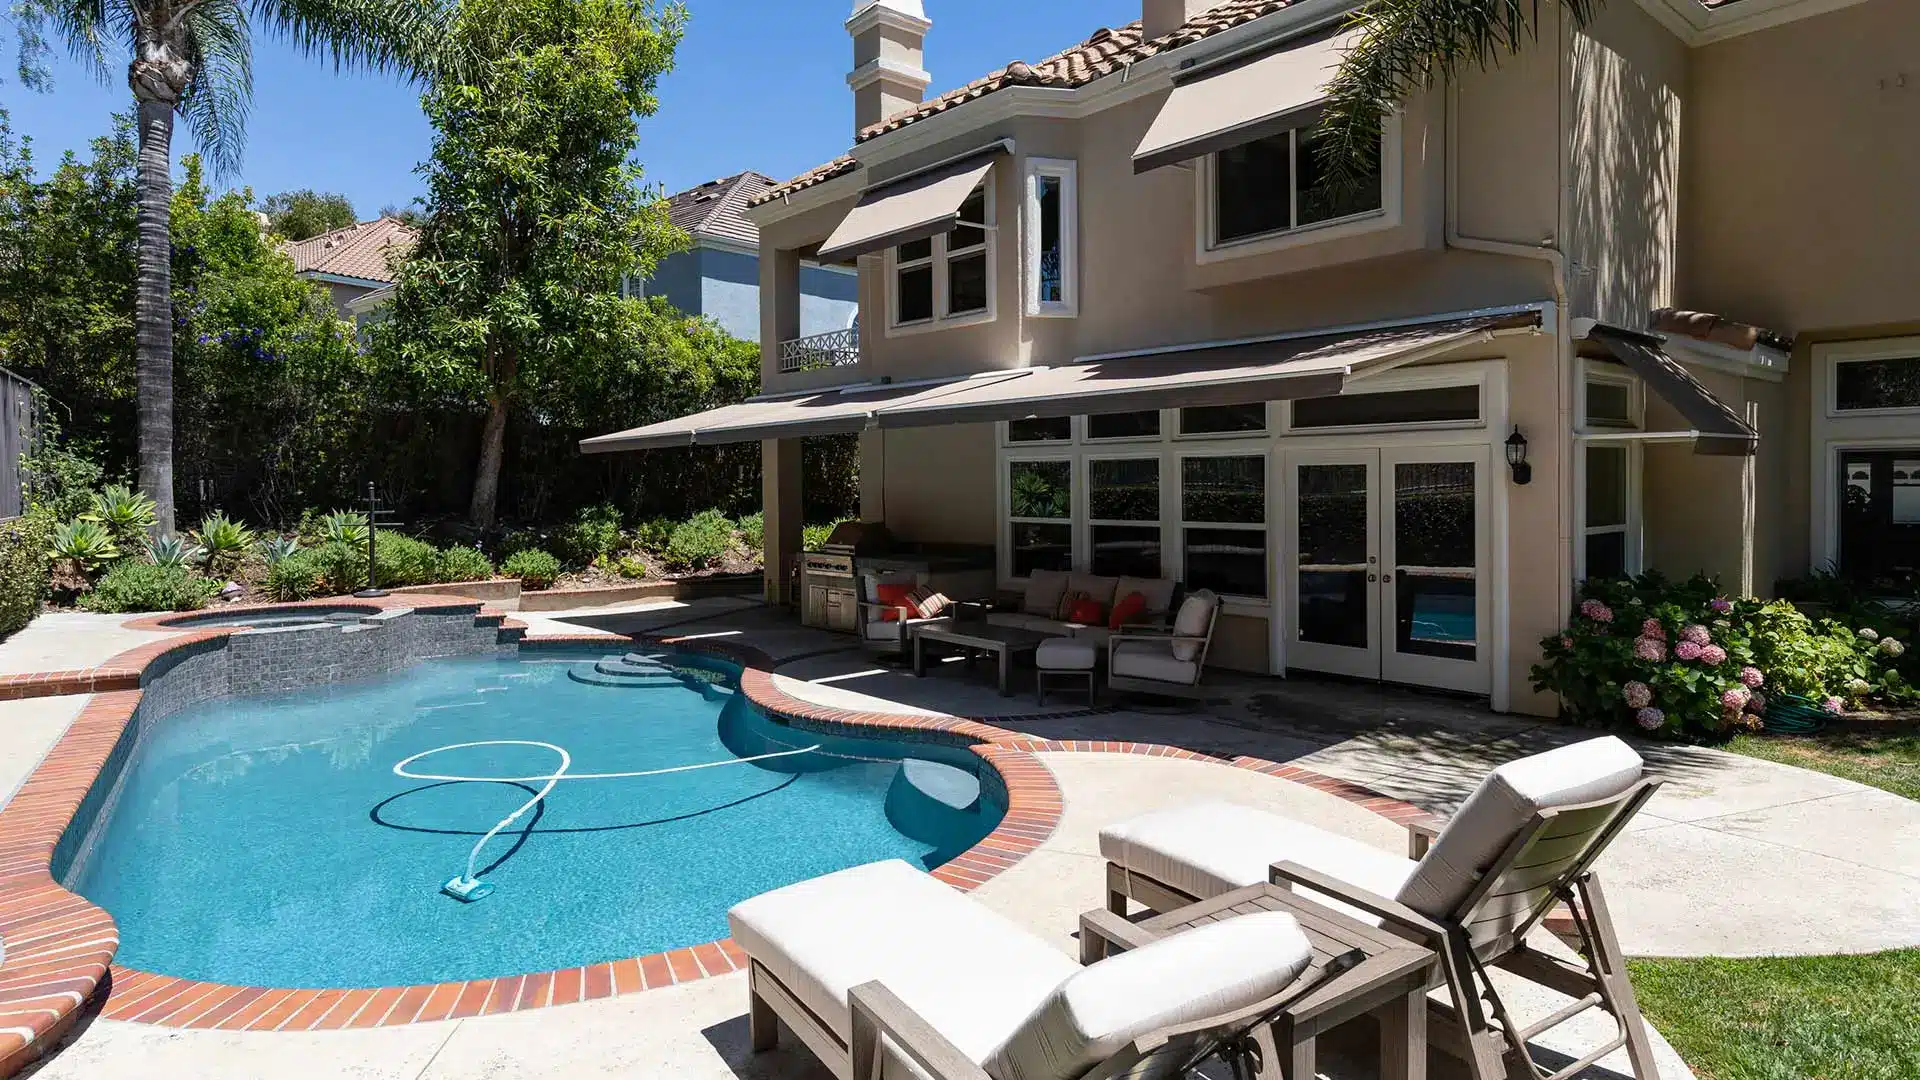 residential property patio with swimming pool san diego ca